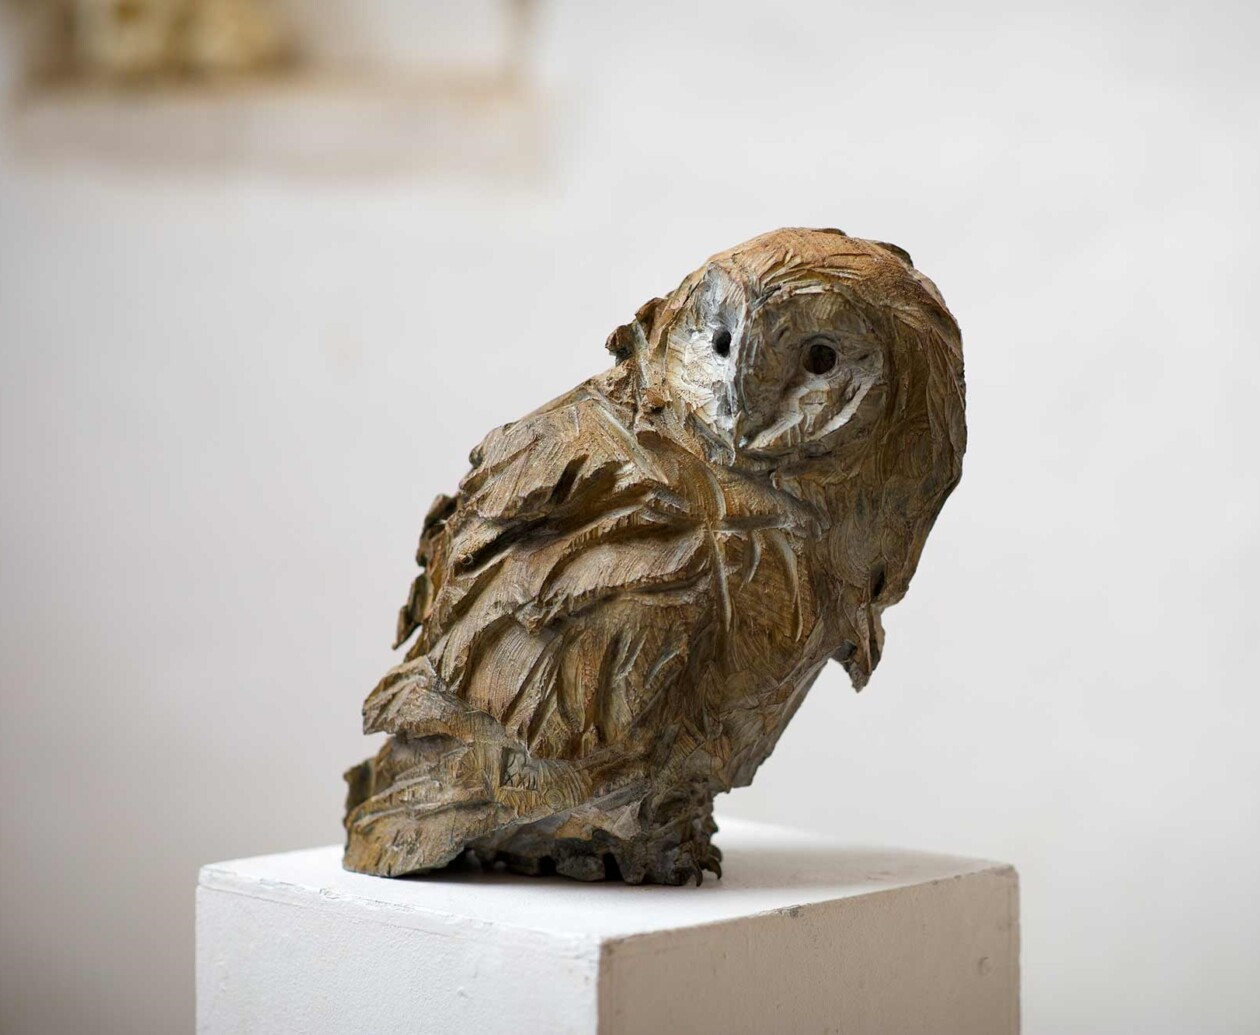 Jürgen Lingl Hand Carves Precise And Textured Figurative Sculptures From Wood (6)